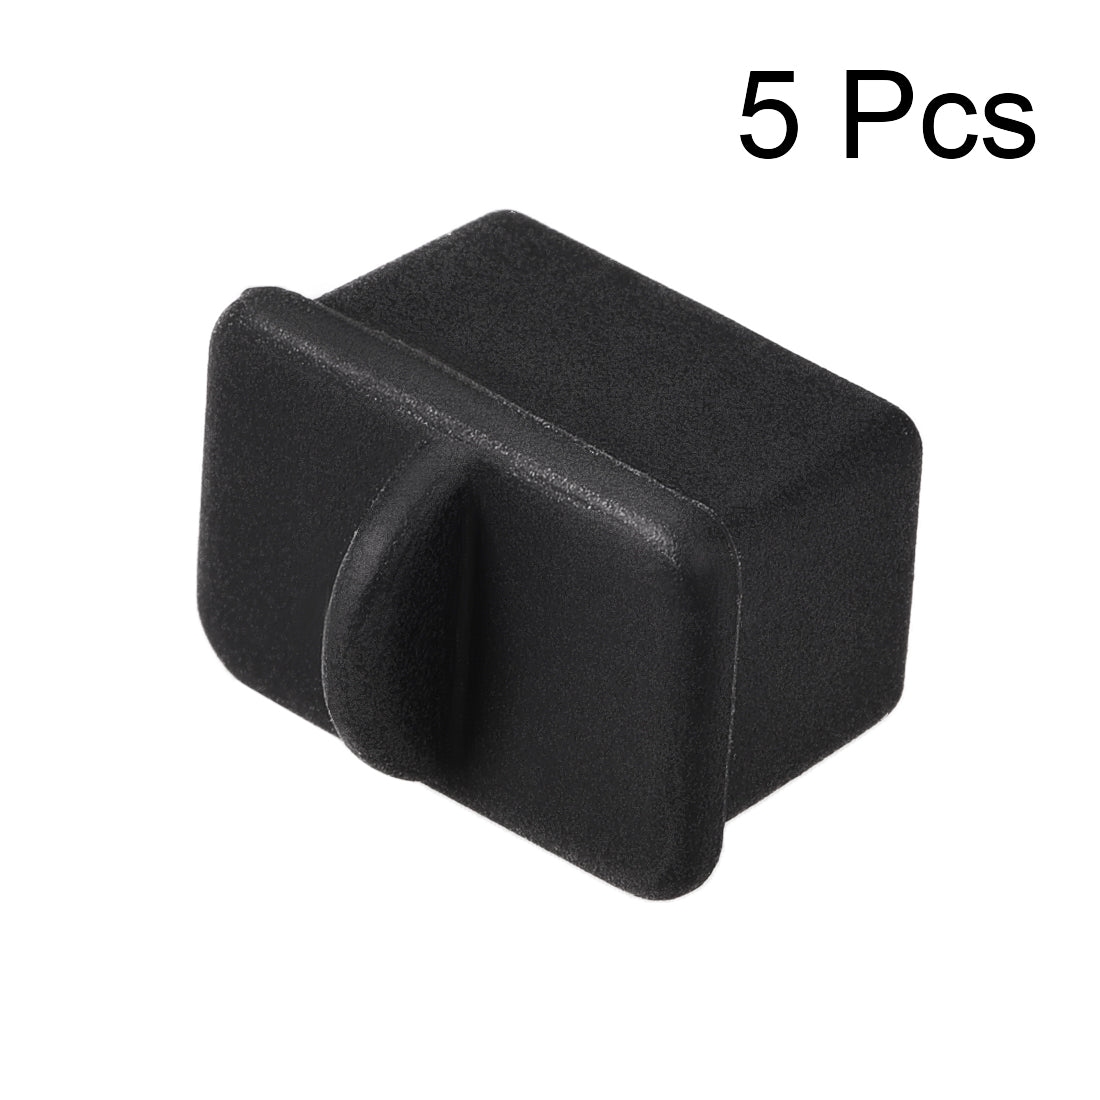 uxcell Uxcell SFP-A Port Anti-Dust Stopper Cap Cover Black Silicone 5pcs